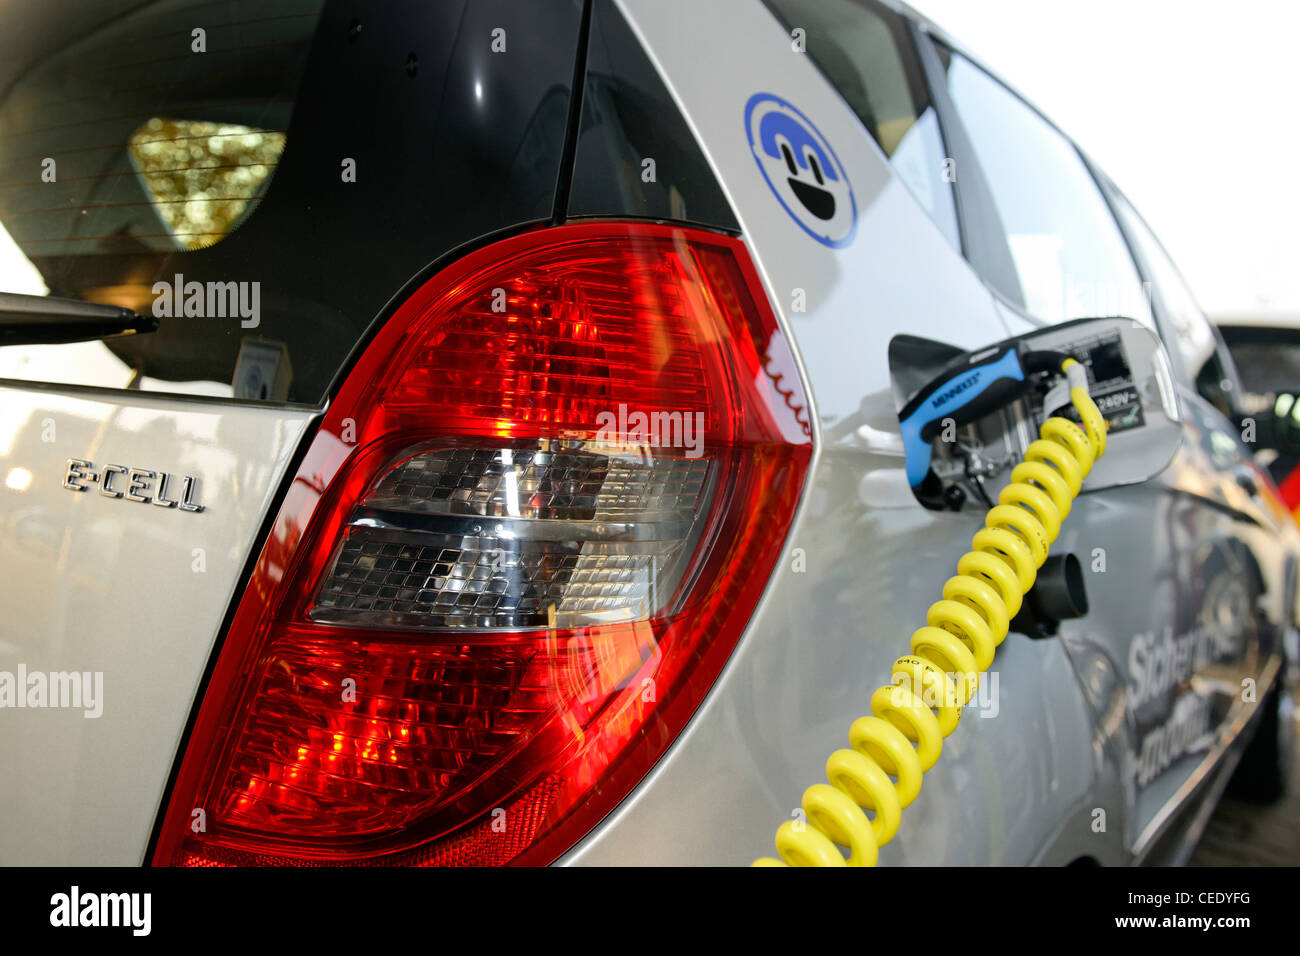 Mercedes Benz A-Class E-CELL during charging, electric car, Hanover, Lower Saxony, Germany Stock Photo